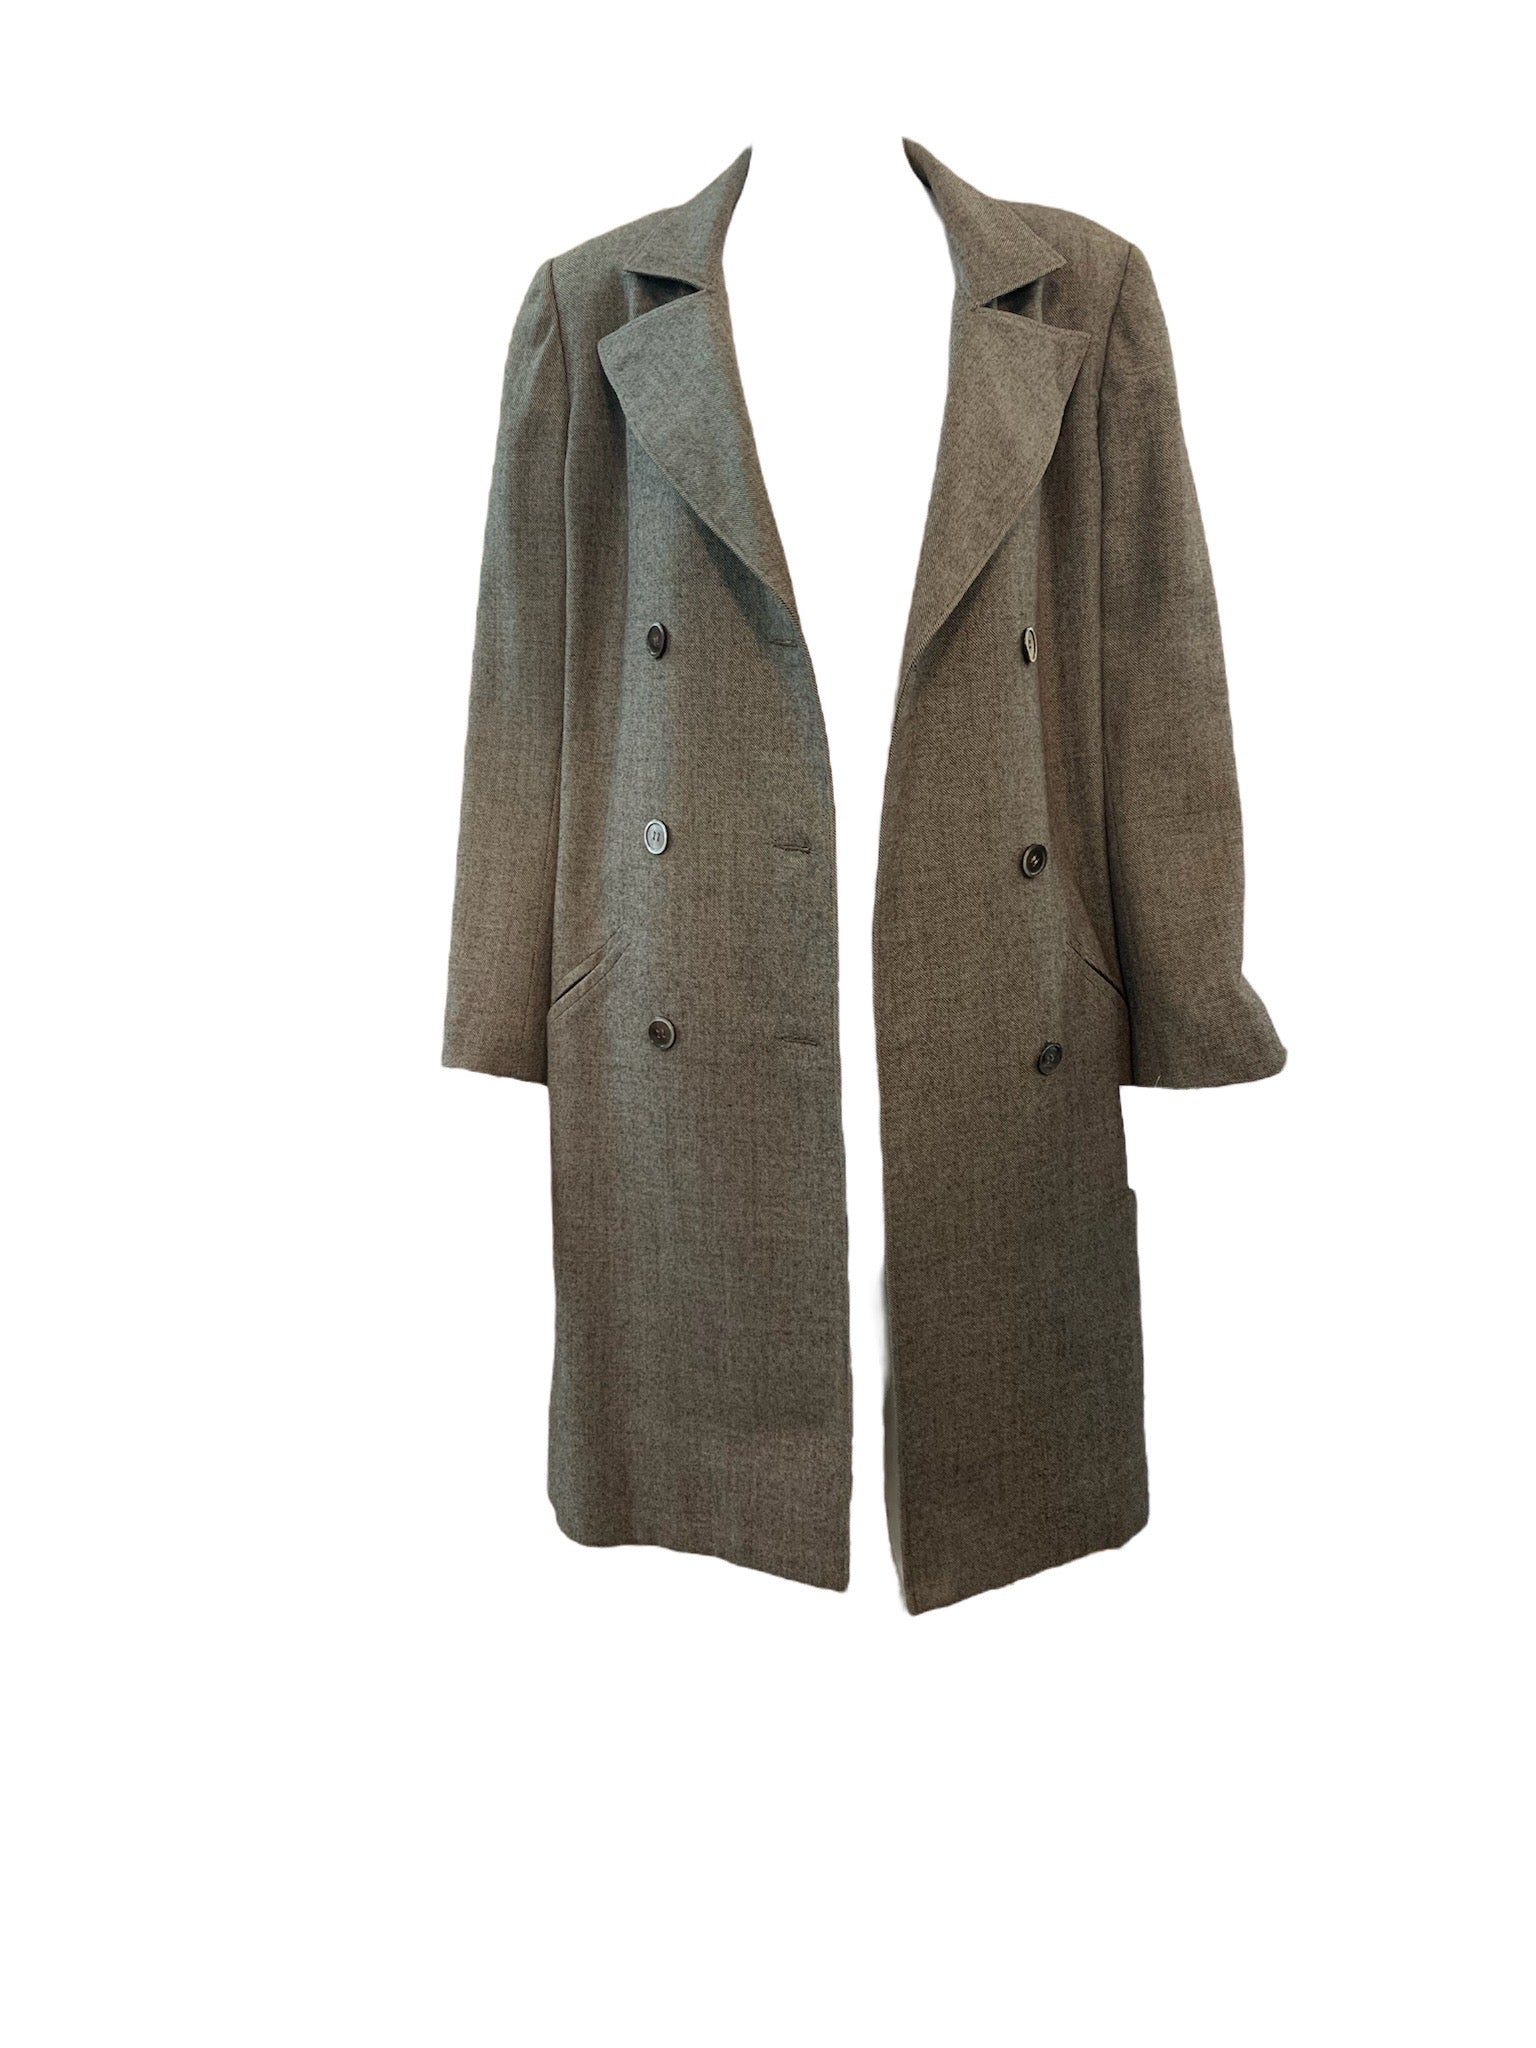 Chloe 70s Grey/Brown Wool Double Breasted Overcoat OPEN FRONT 2 of 6